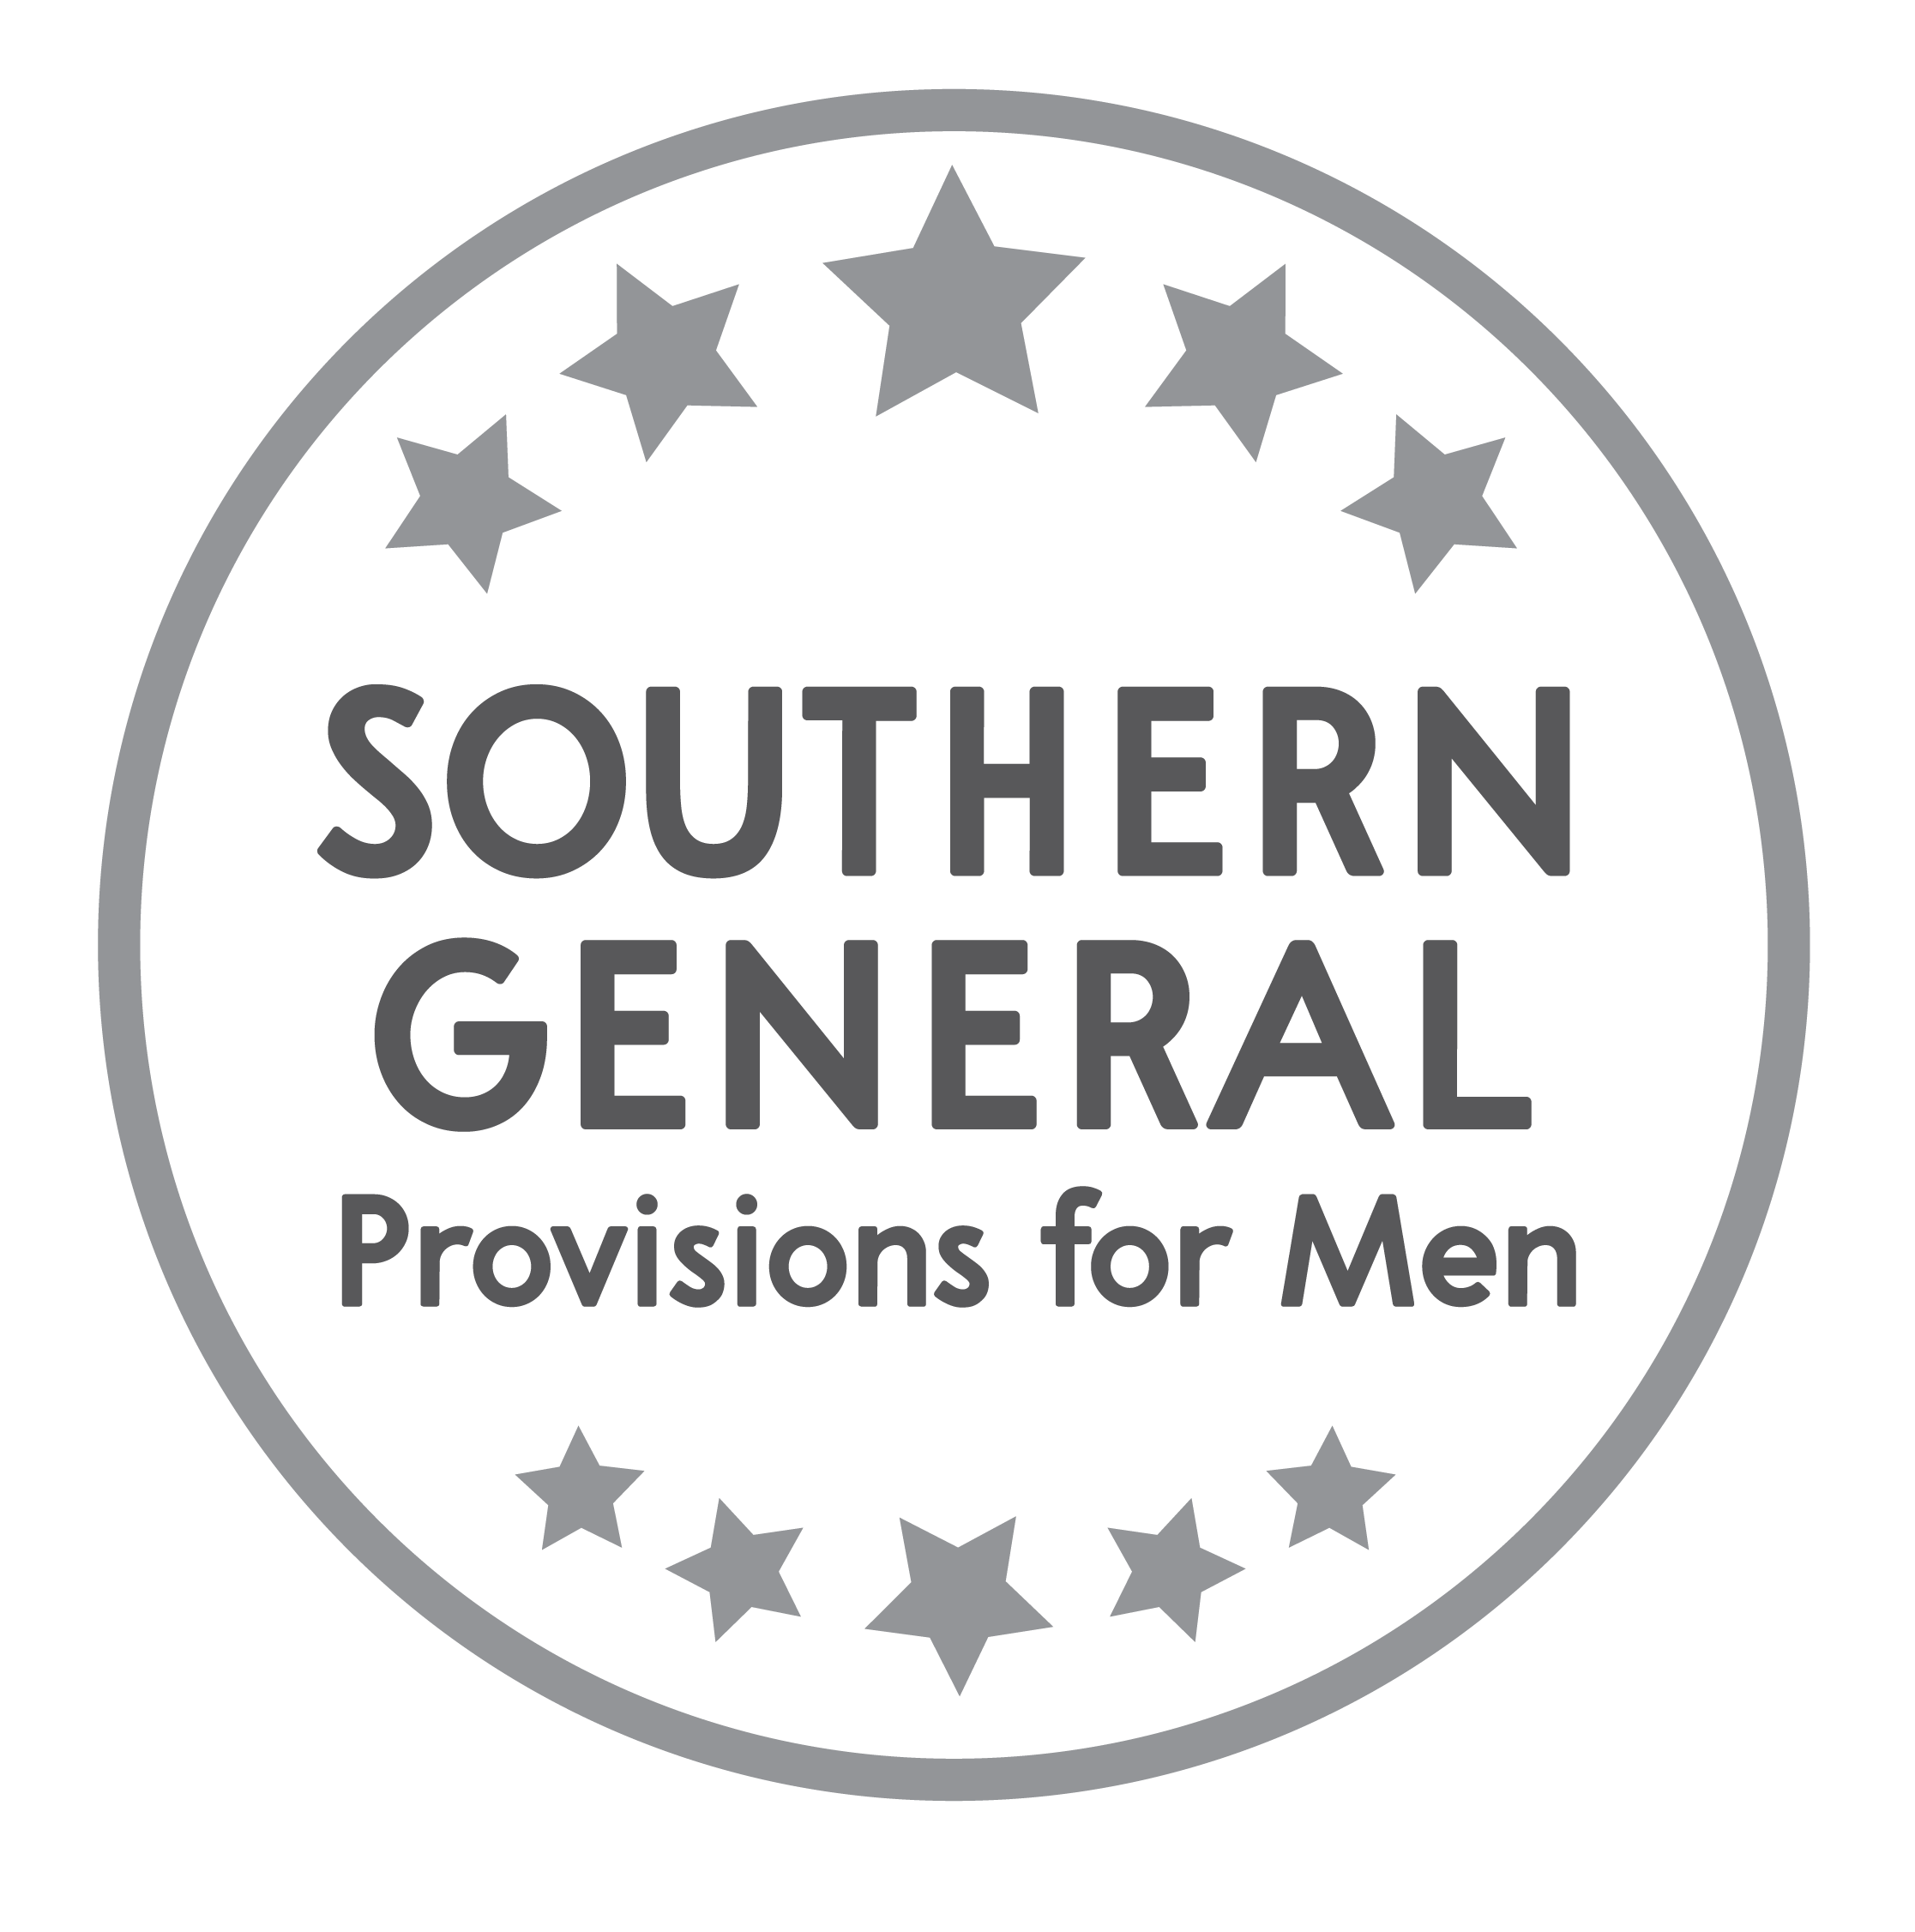 Southern General